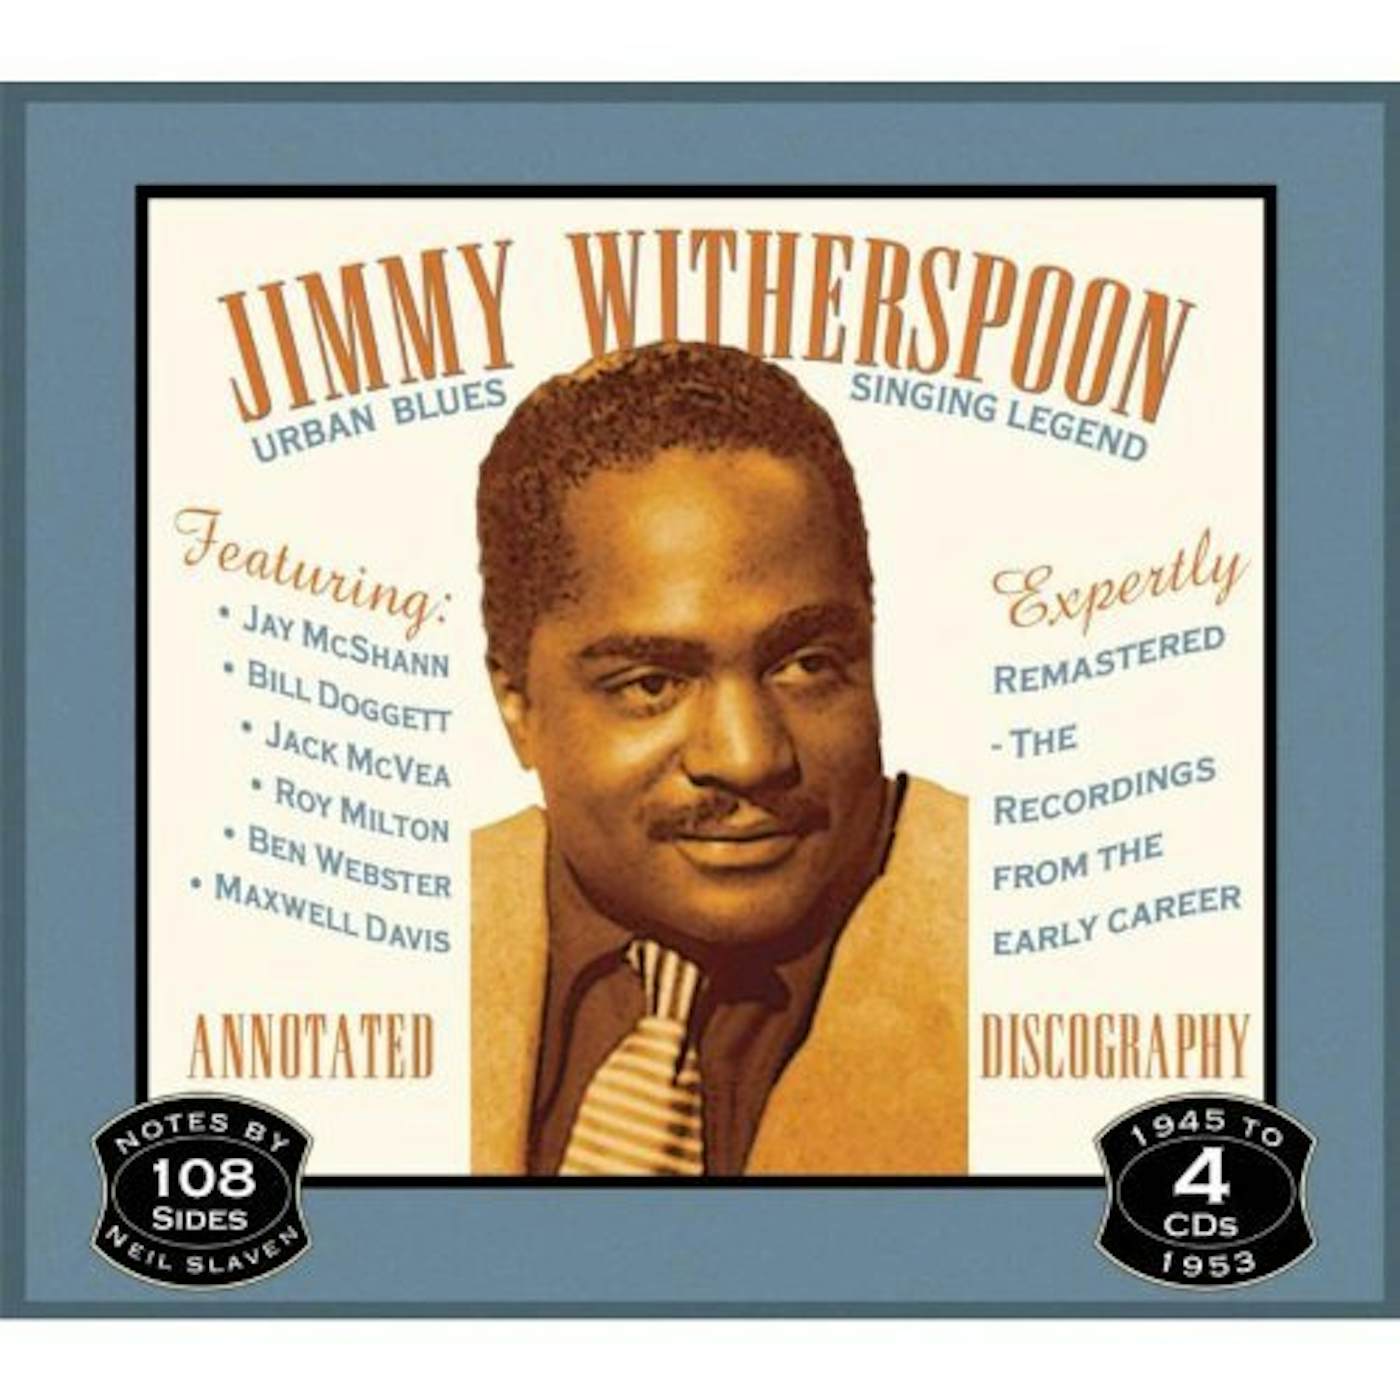 Jimmy Witherspoon URBAN BLUES SINGING LEGEND CD